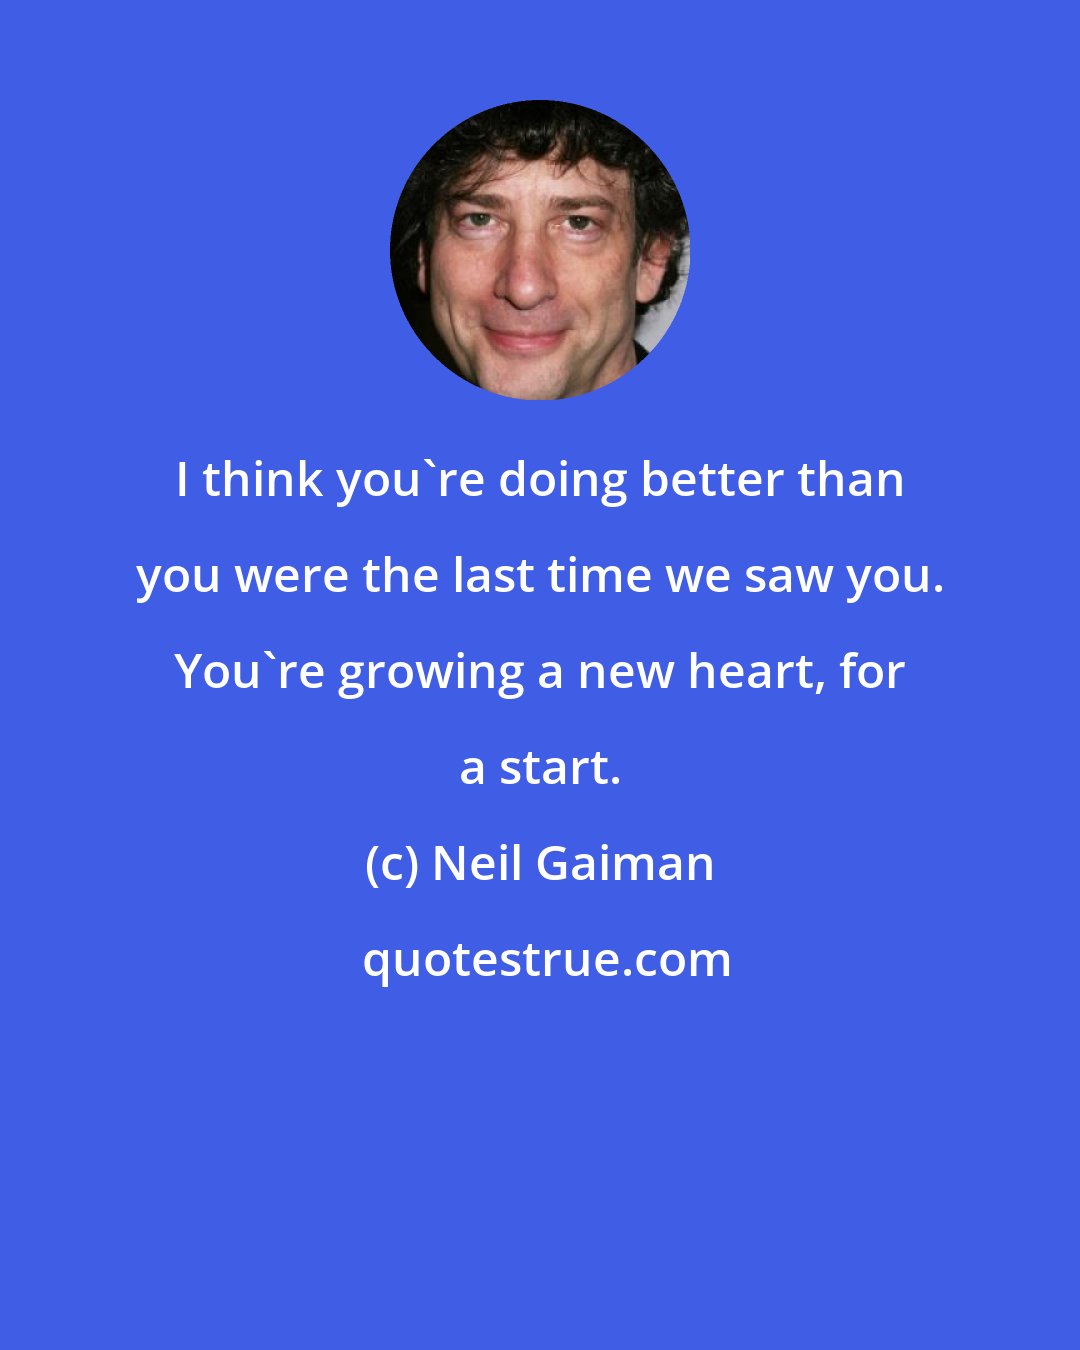 Neil Gaiman: I think you're doing better than you were the last time we saw you. You're growing a new heart, for a start.